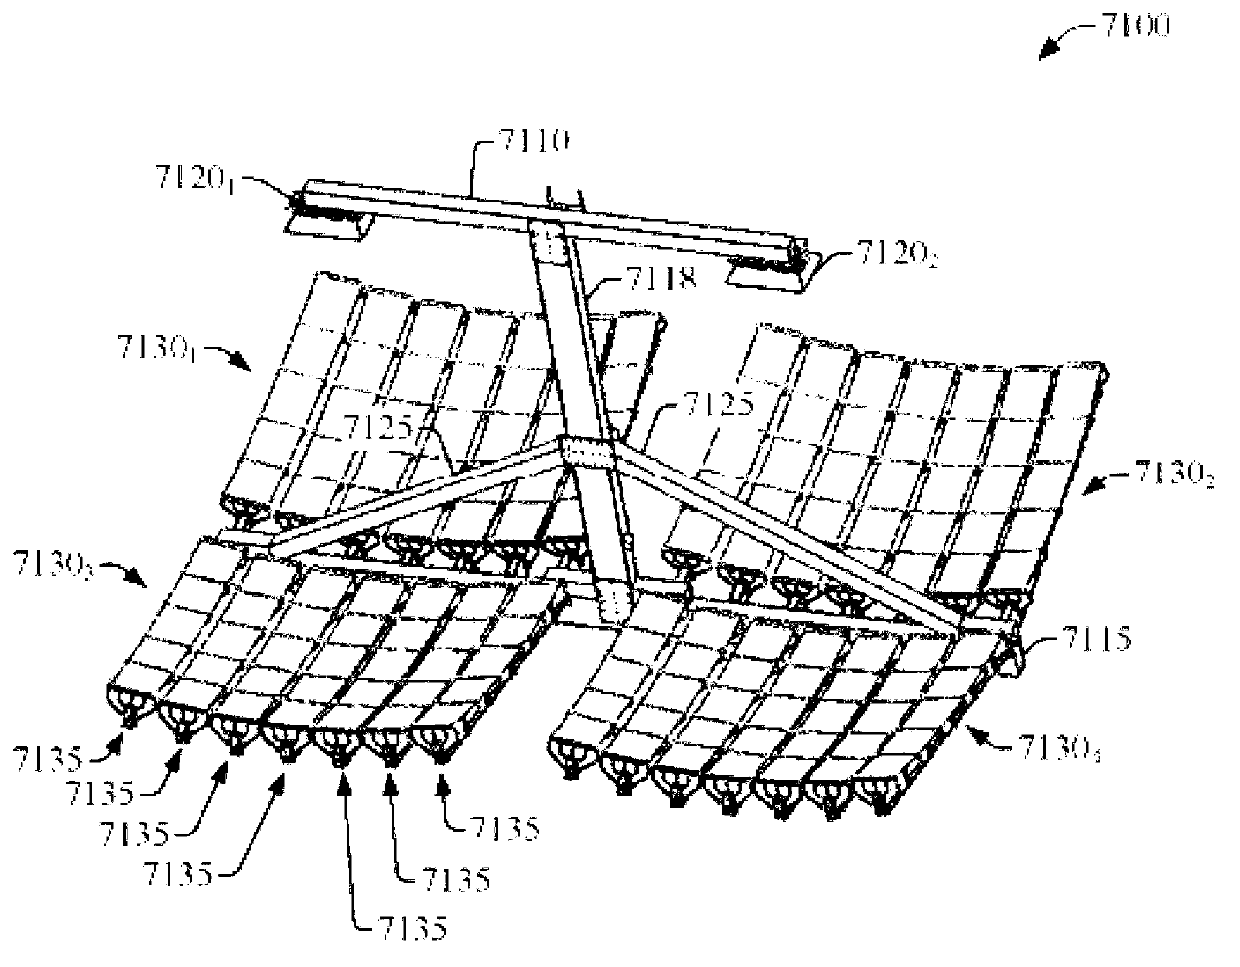 Solar collector assembly